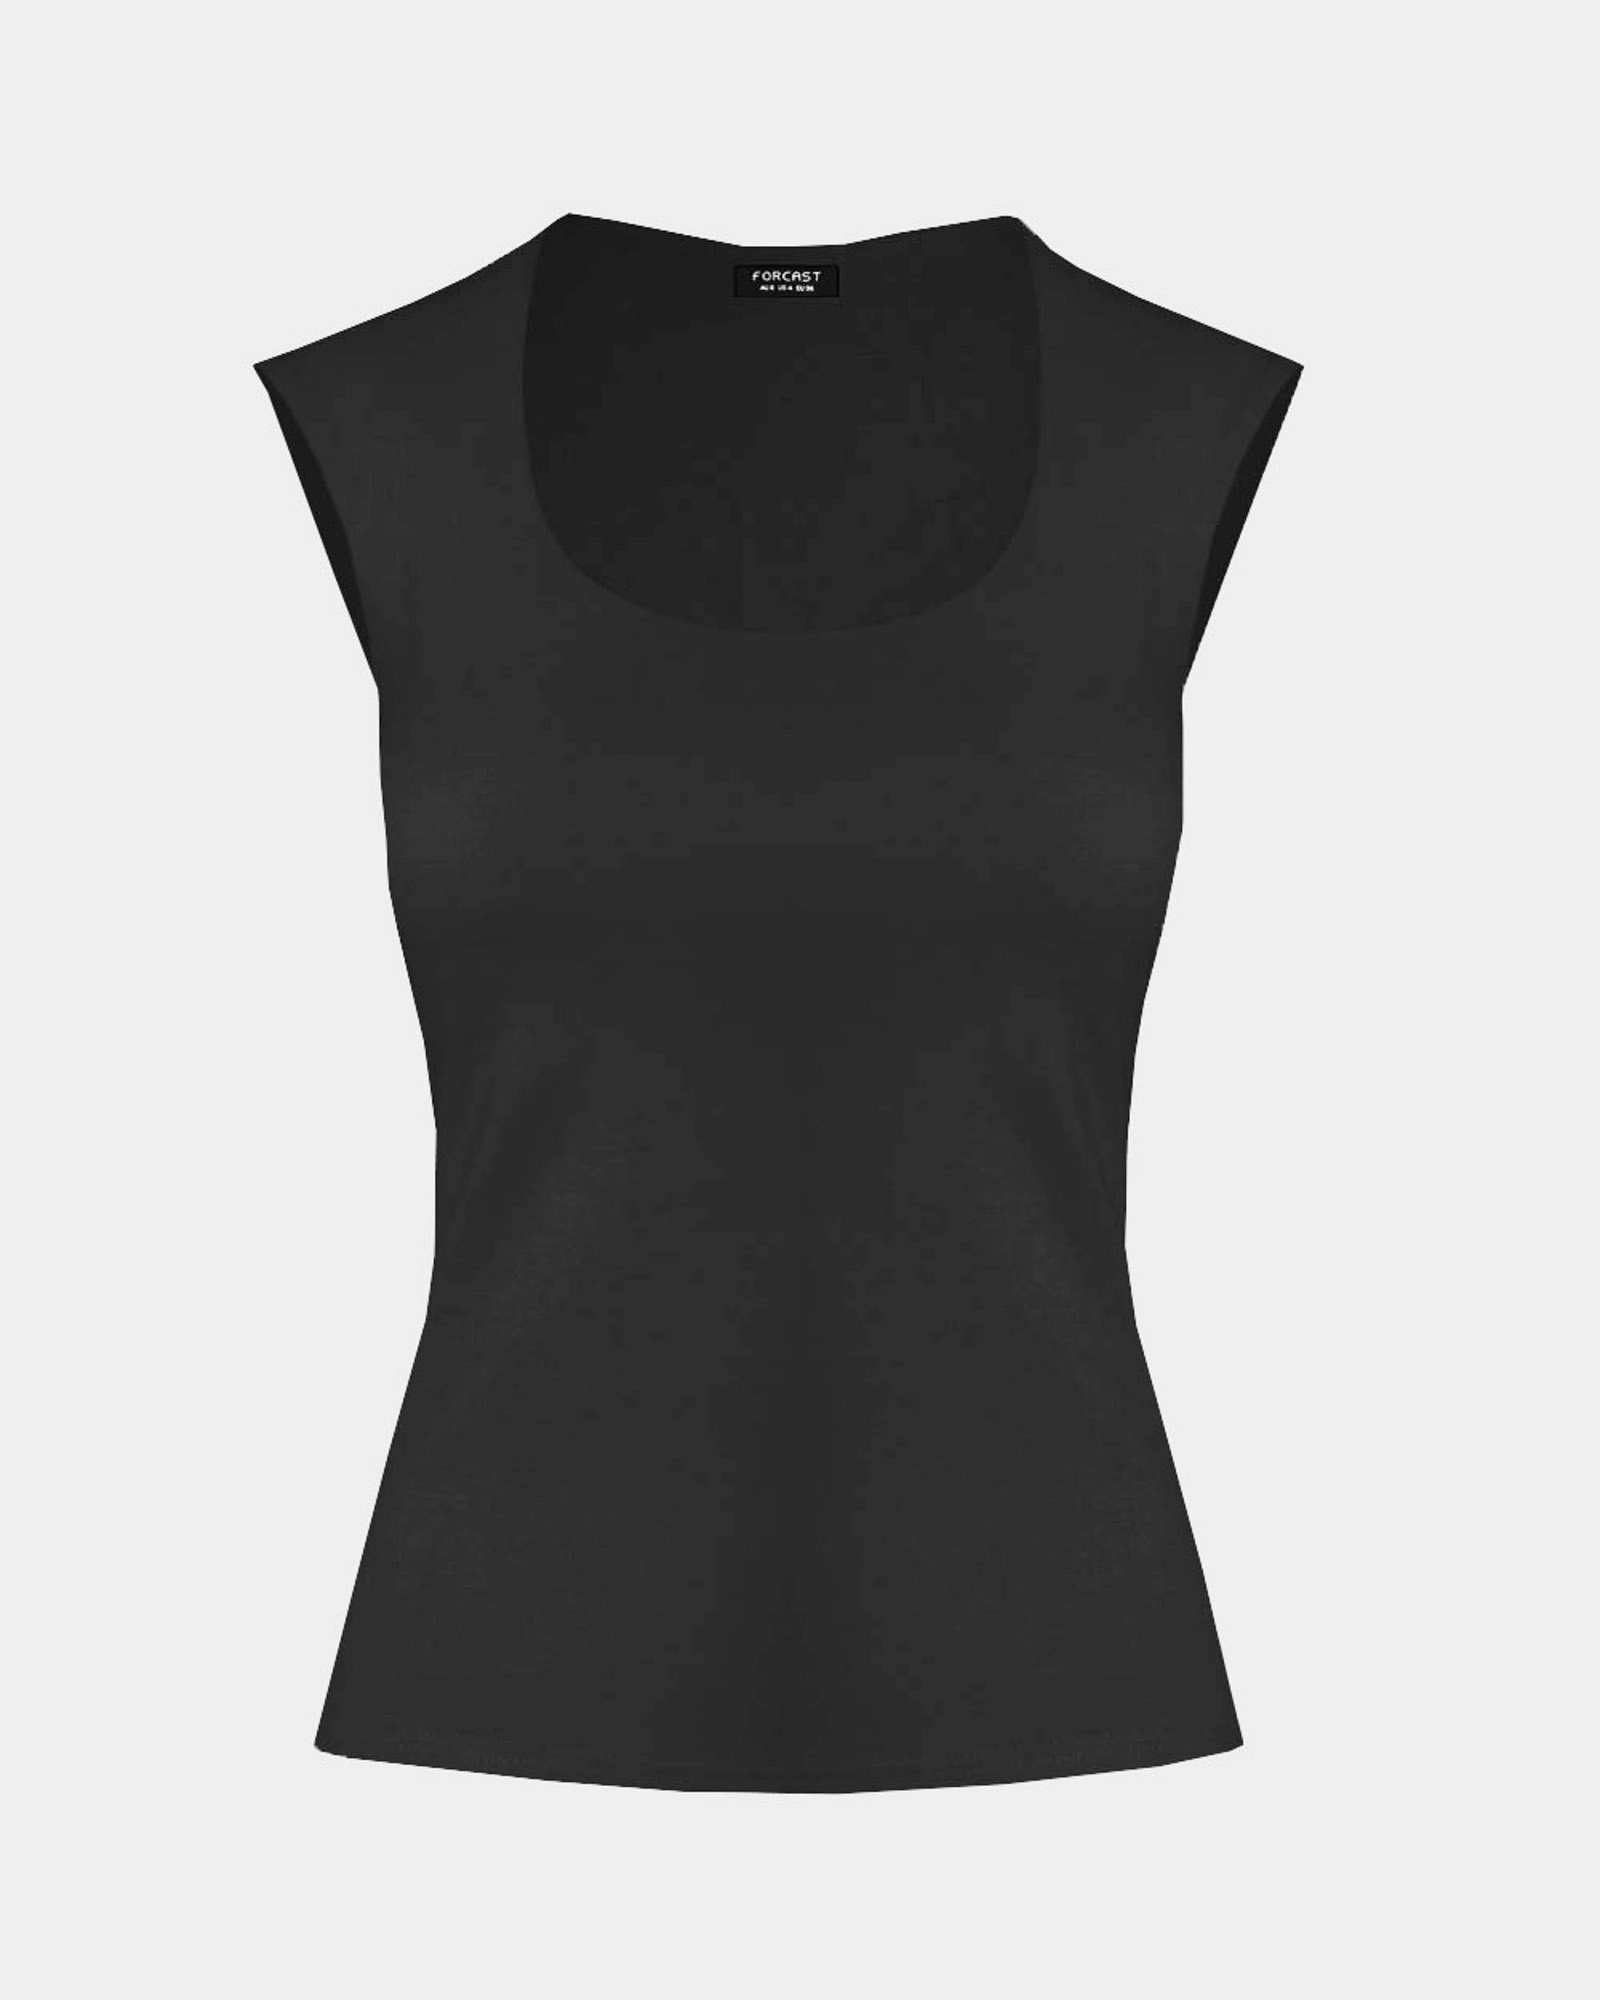 Soho Rounded Square Neck Top